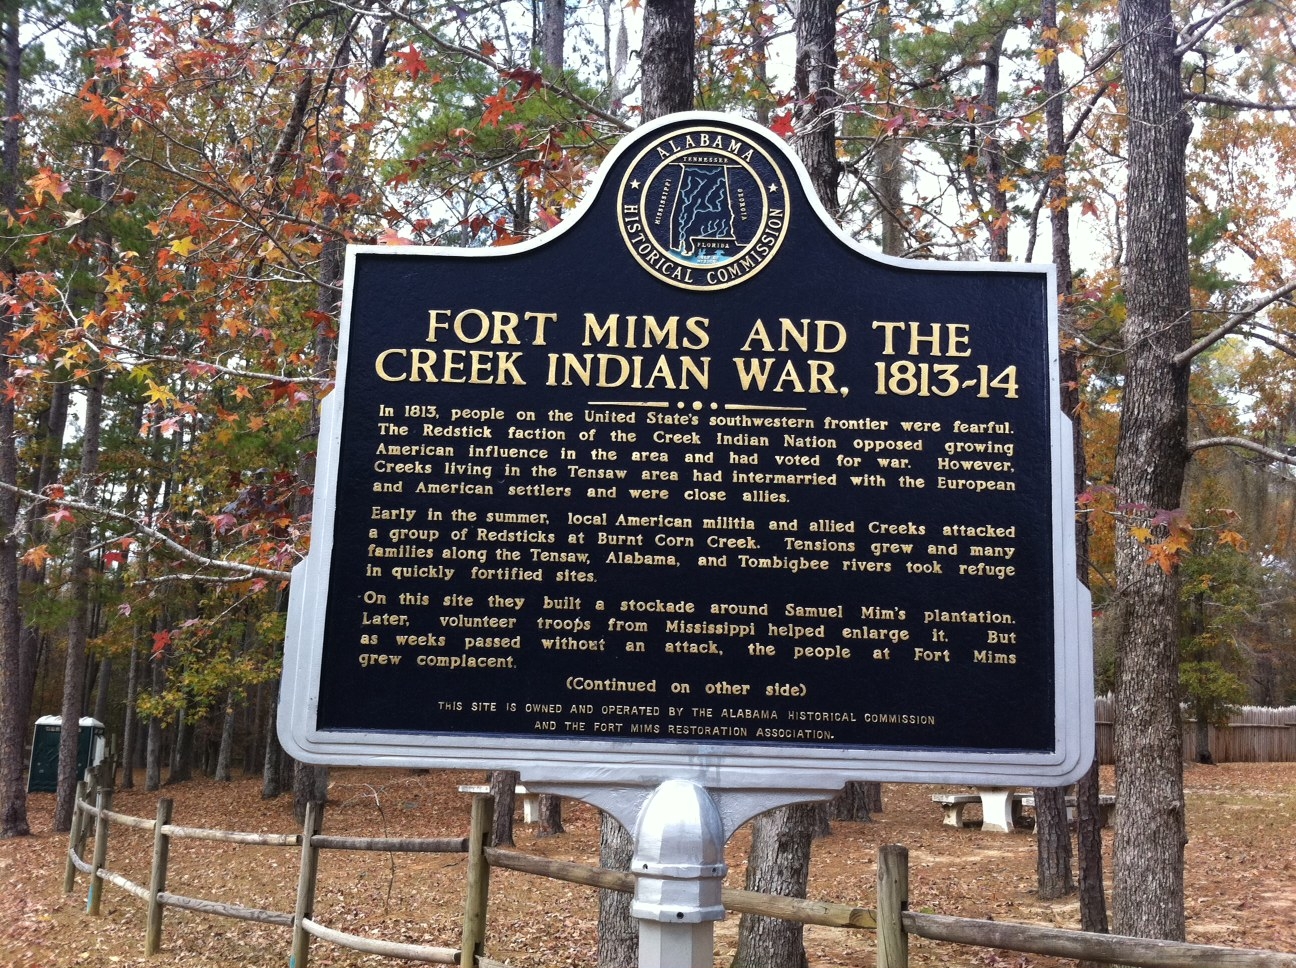 The Fort Mims Massacre was considered to be one of the greatest military accomplishments in Native American history.